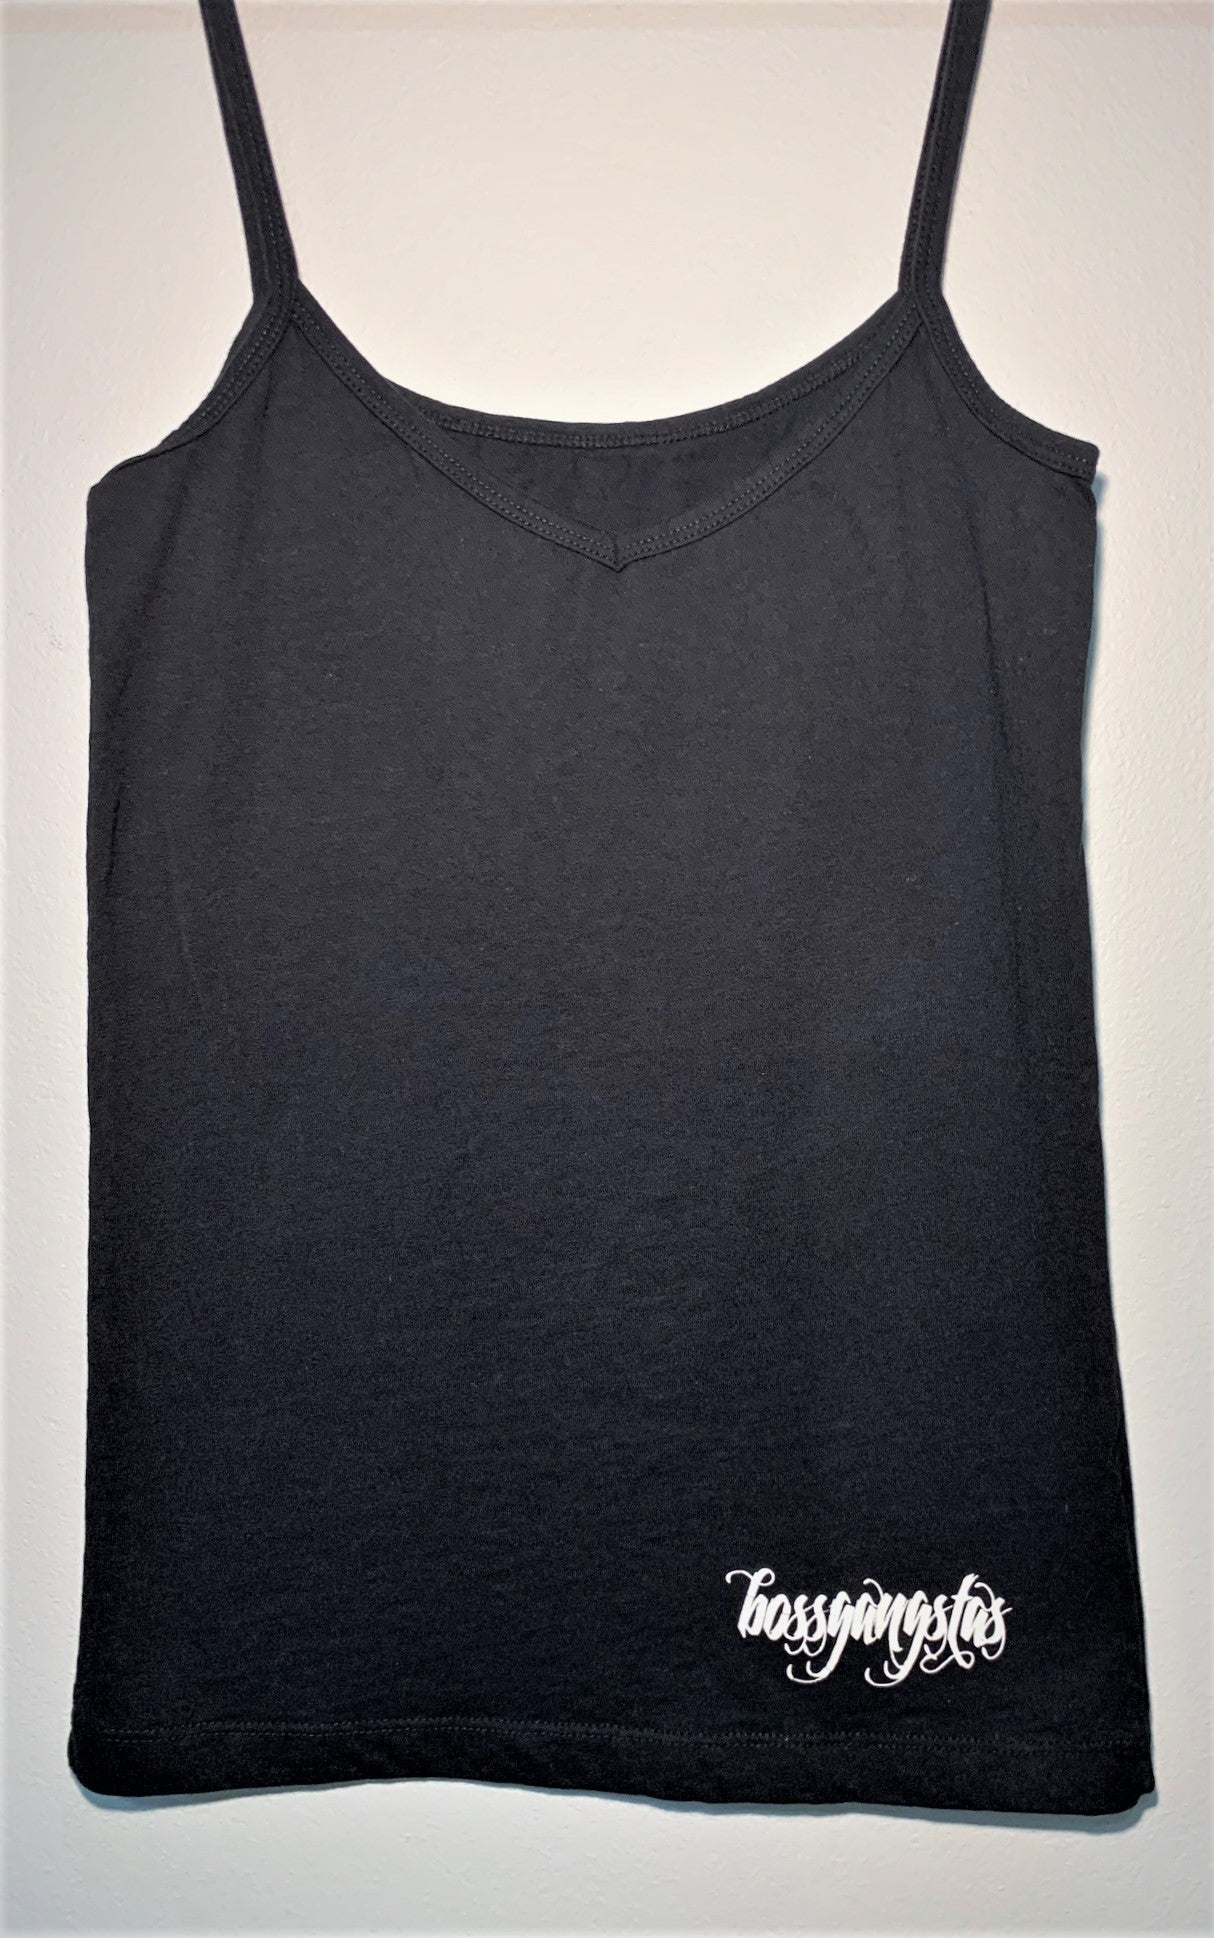 Legacy Series Capone Tank Top